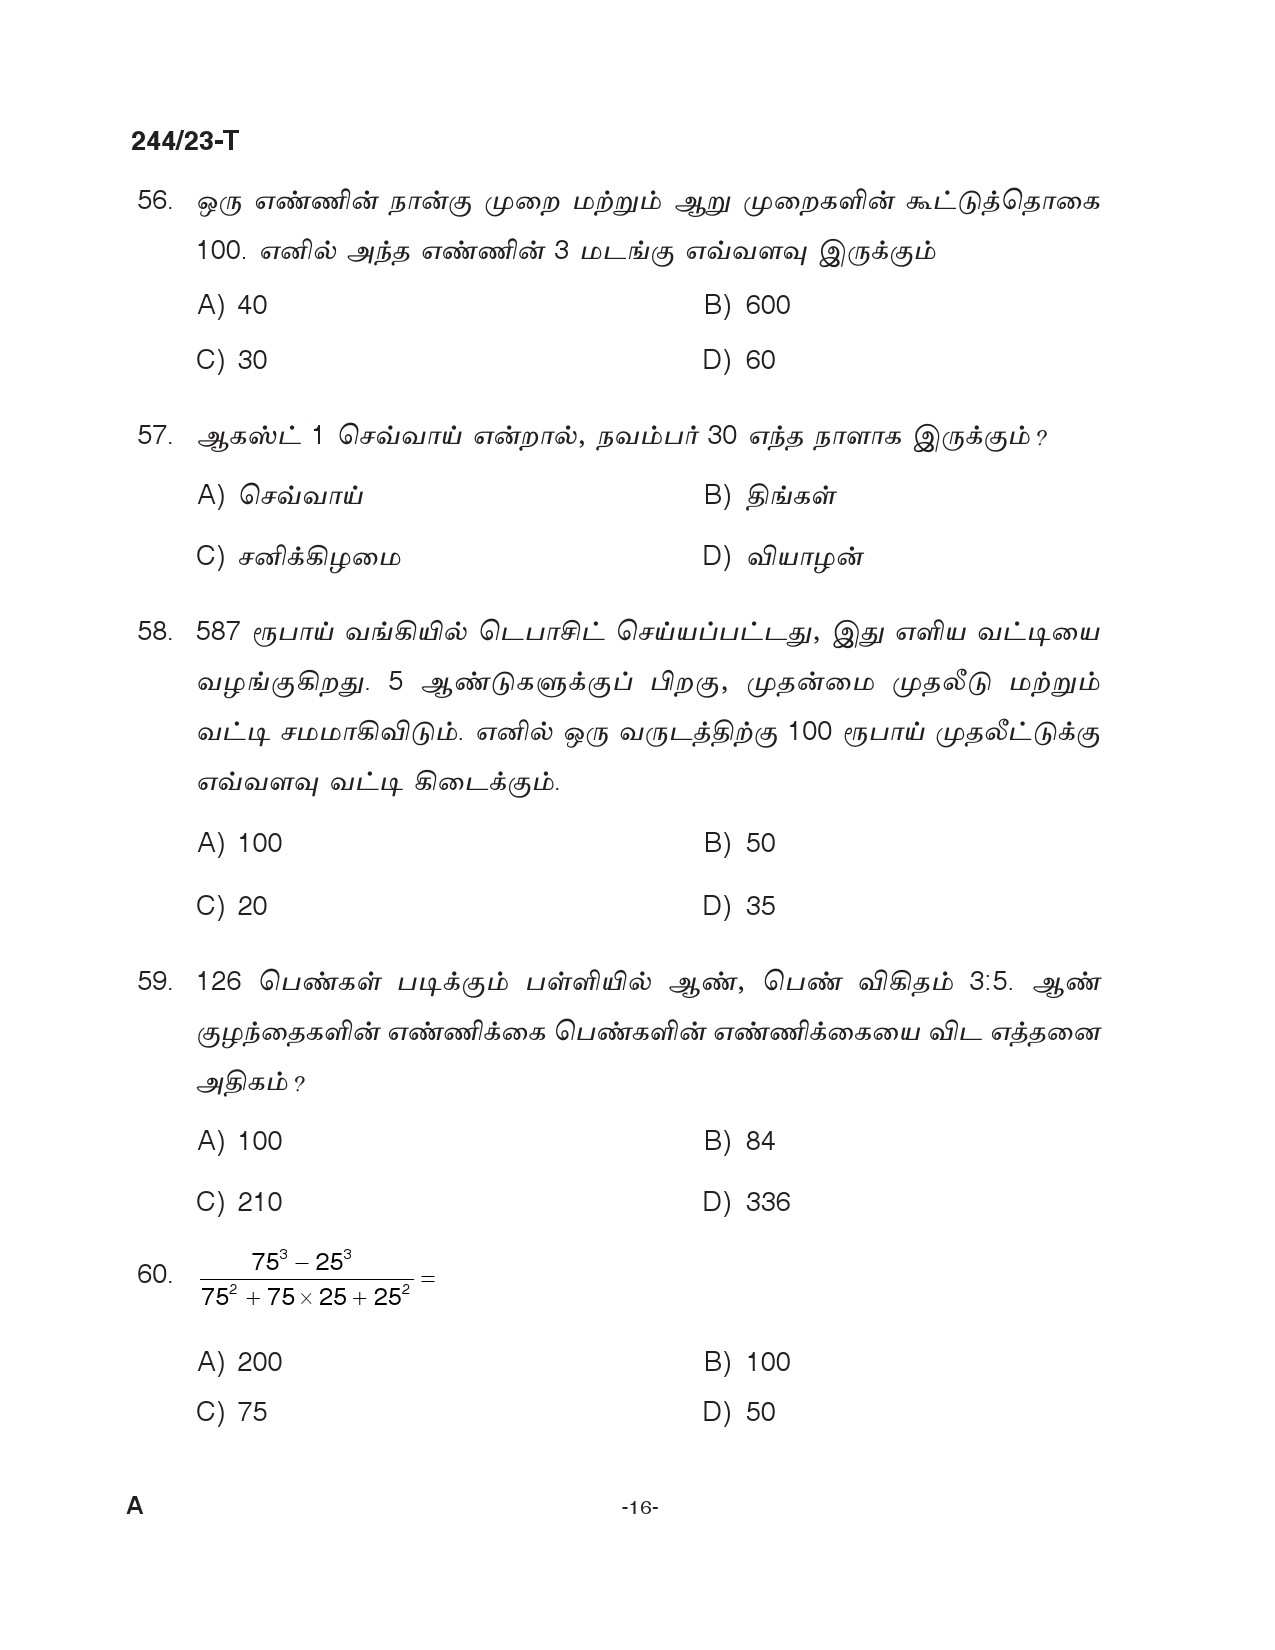 KPSC Fire and Rescue Officer Trainee Tamil Exam 2023 Code 2442023 T 15